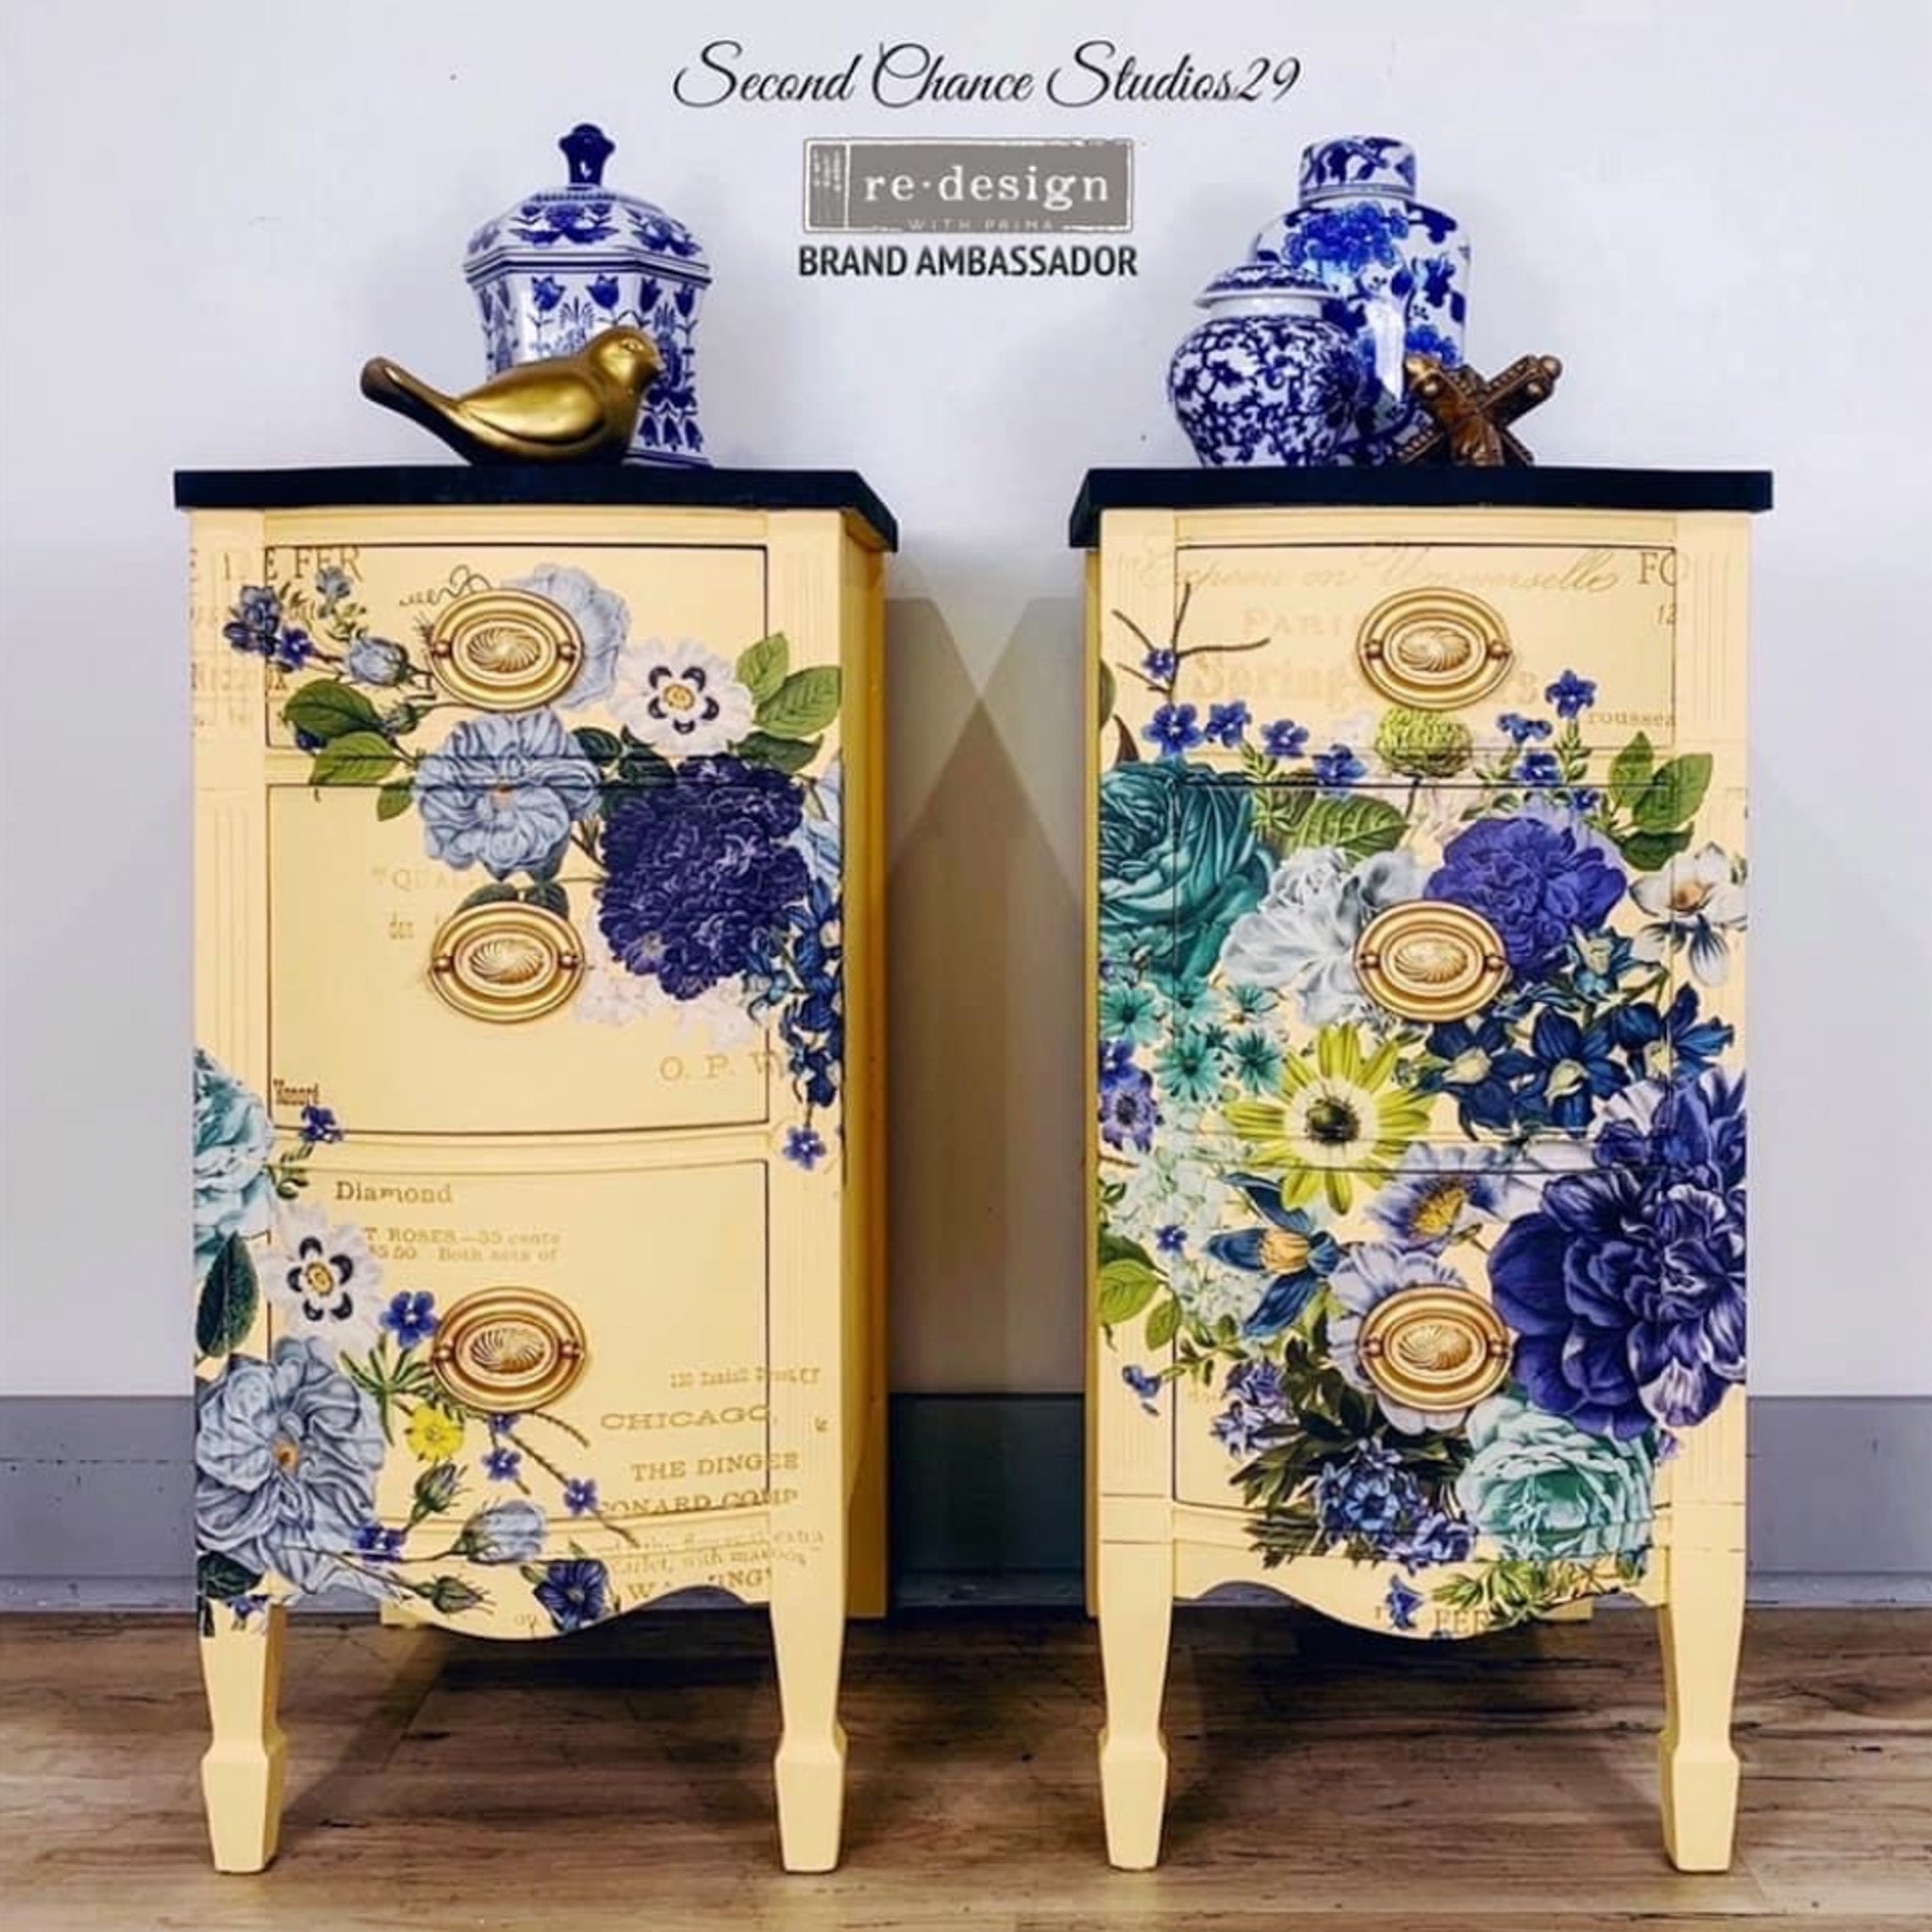 Two vintage nightstands refurbished by Second Chance Studios 29, a ReDesign with Prima Brand Ambassador, are painted a muted yellow and feature the Cosmic Roses transfer on them.